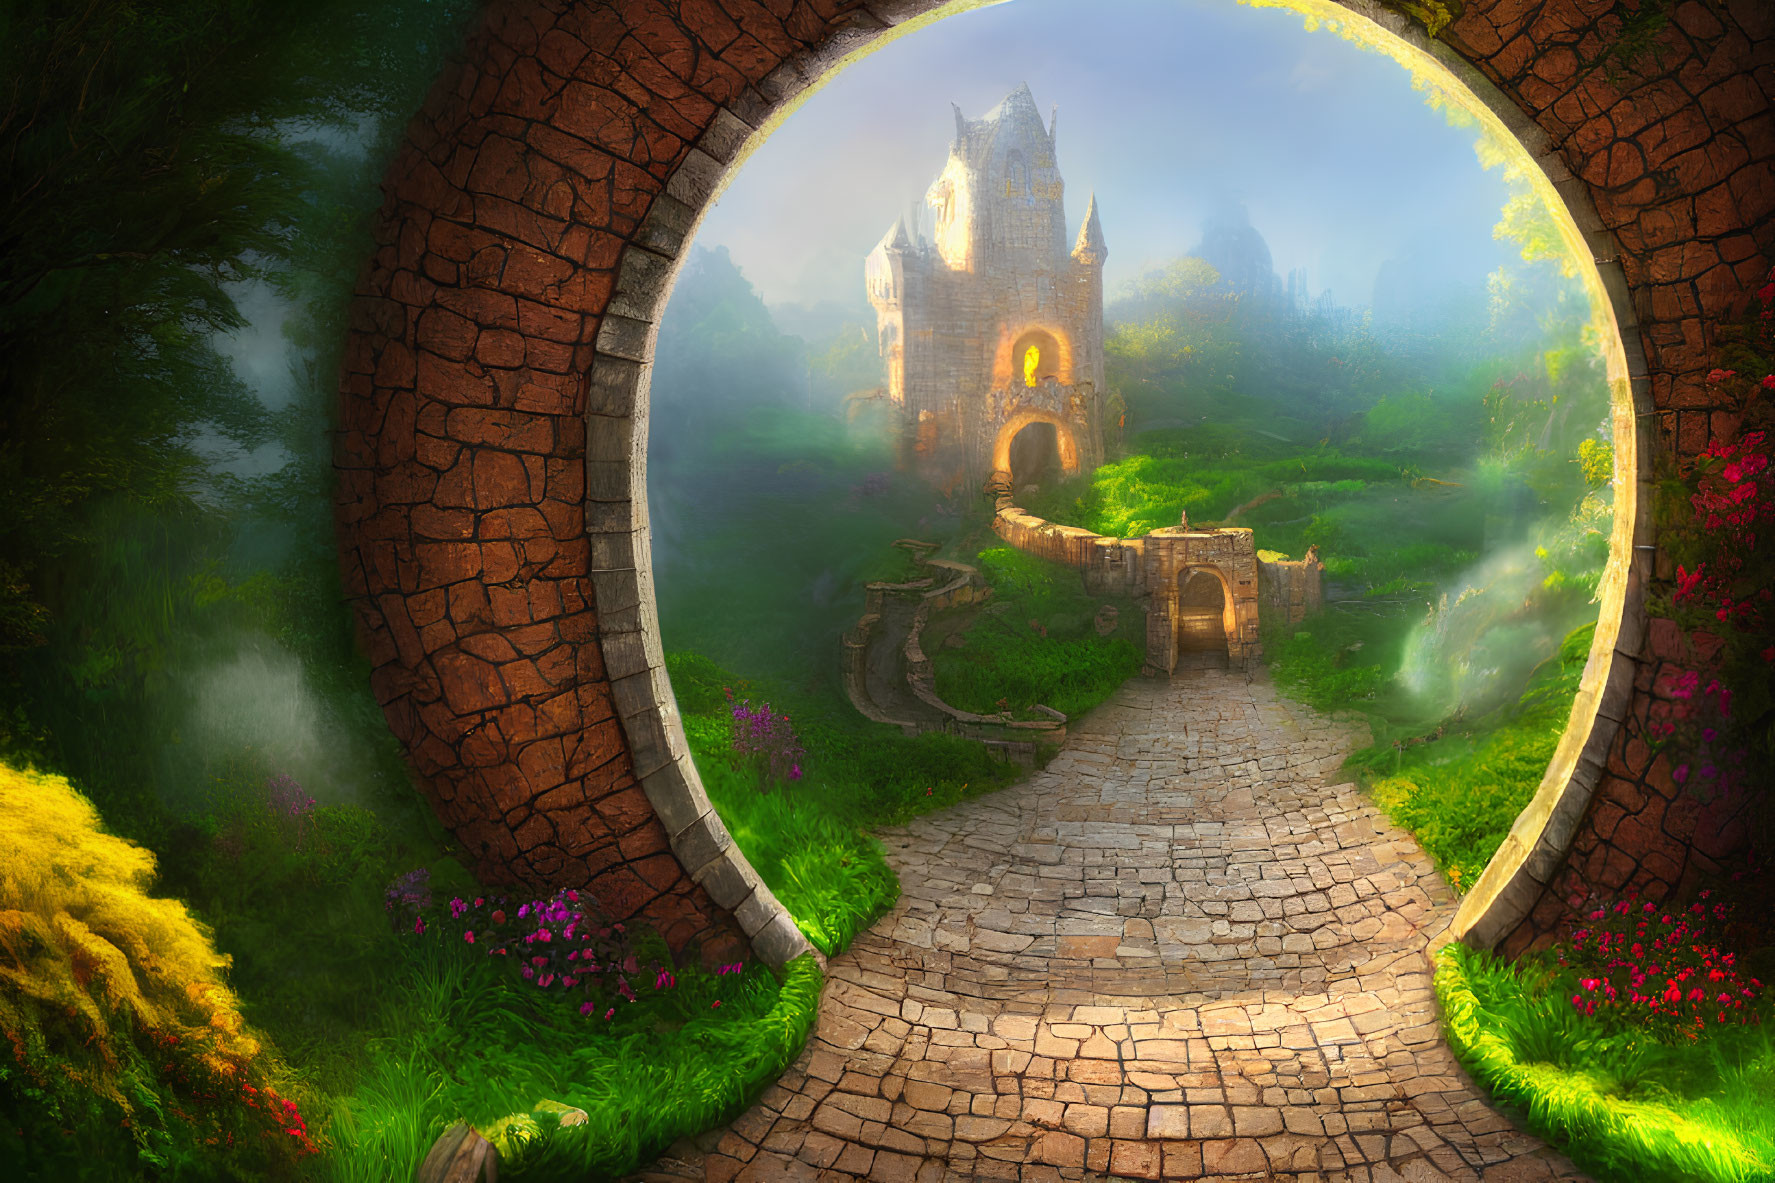 Mystical stone archway leading to enchanting castle in lush landscape